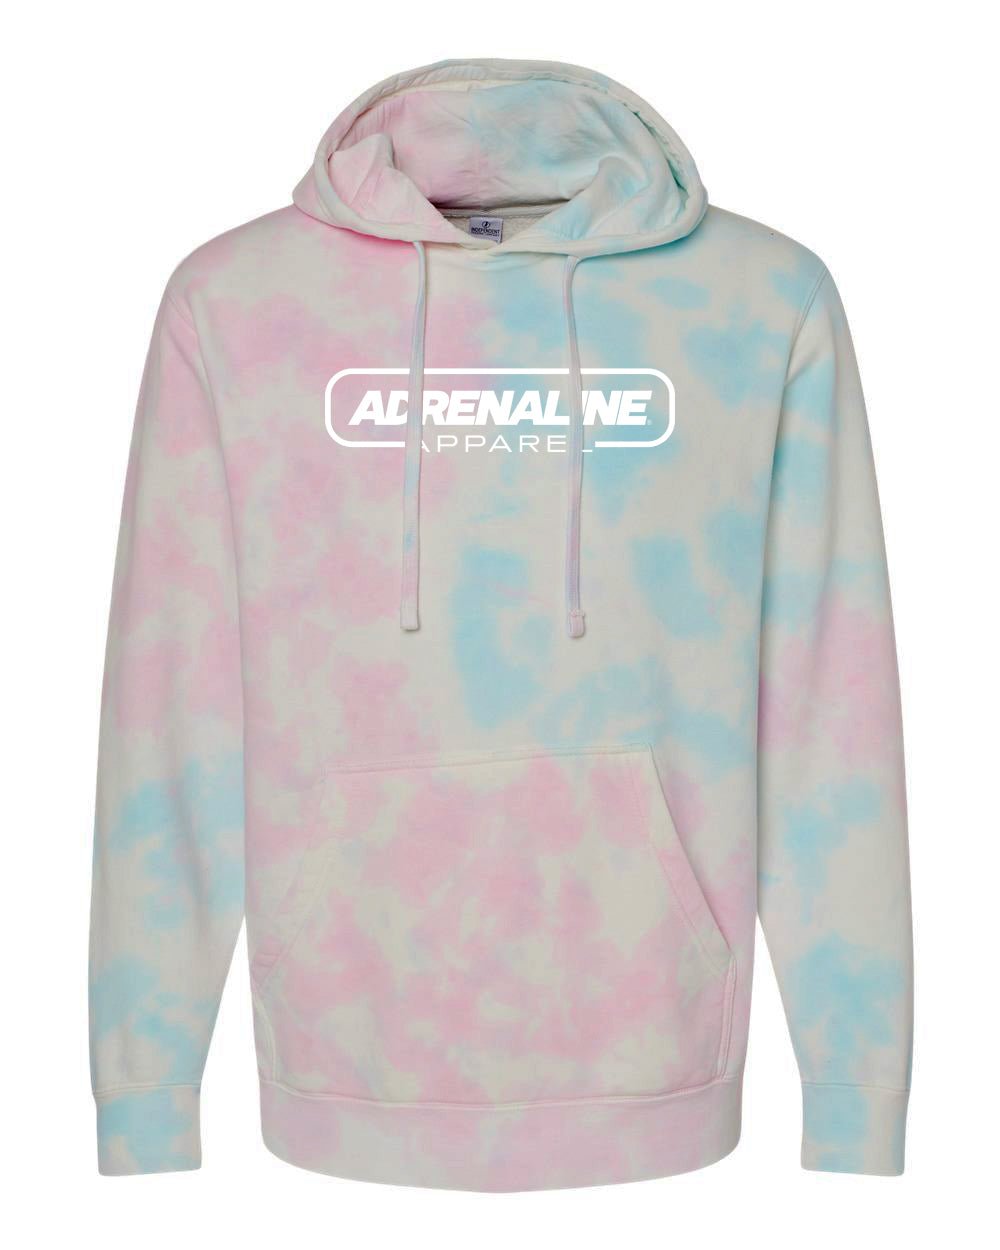 Pre-Order LIMITED EDITION Midweight Adrenaline Apparel Tie-Dye Hoodies - AdrenalineApparel